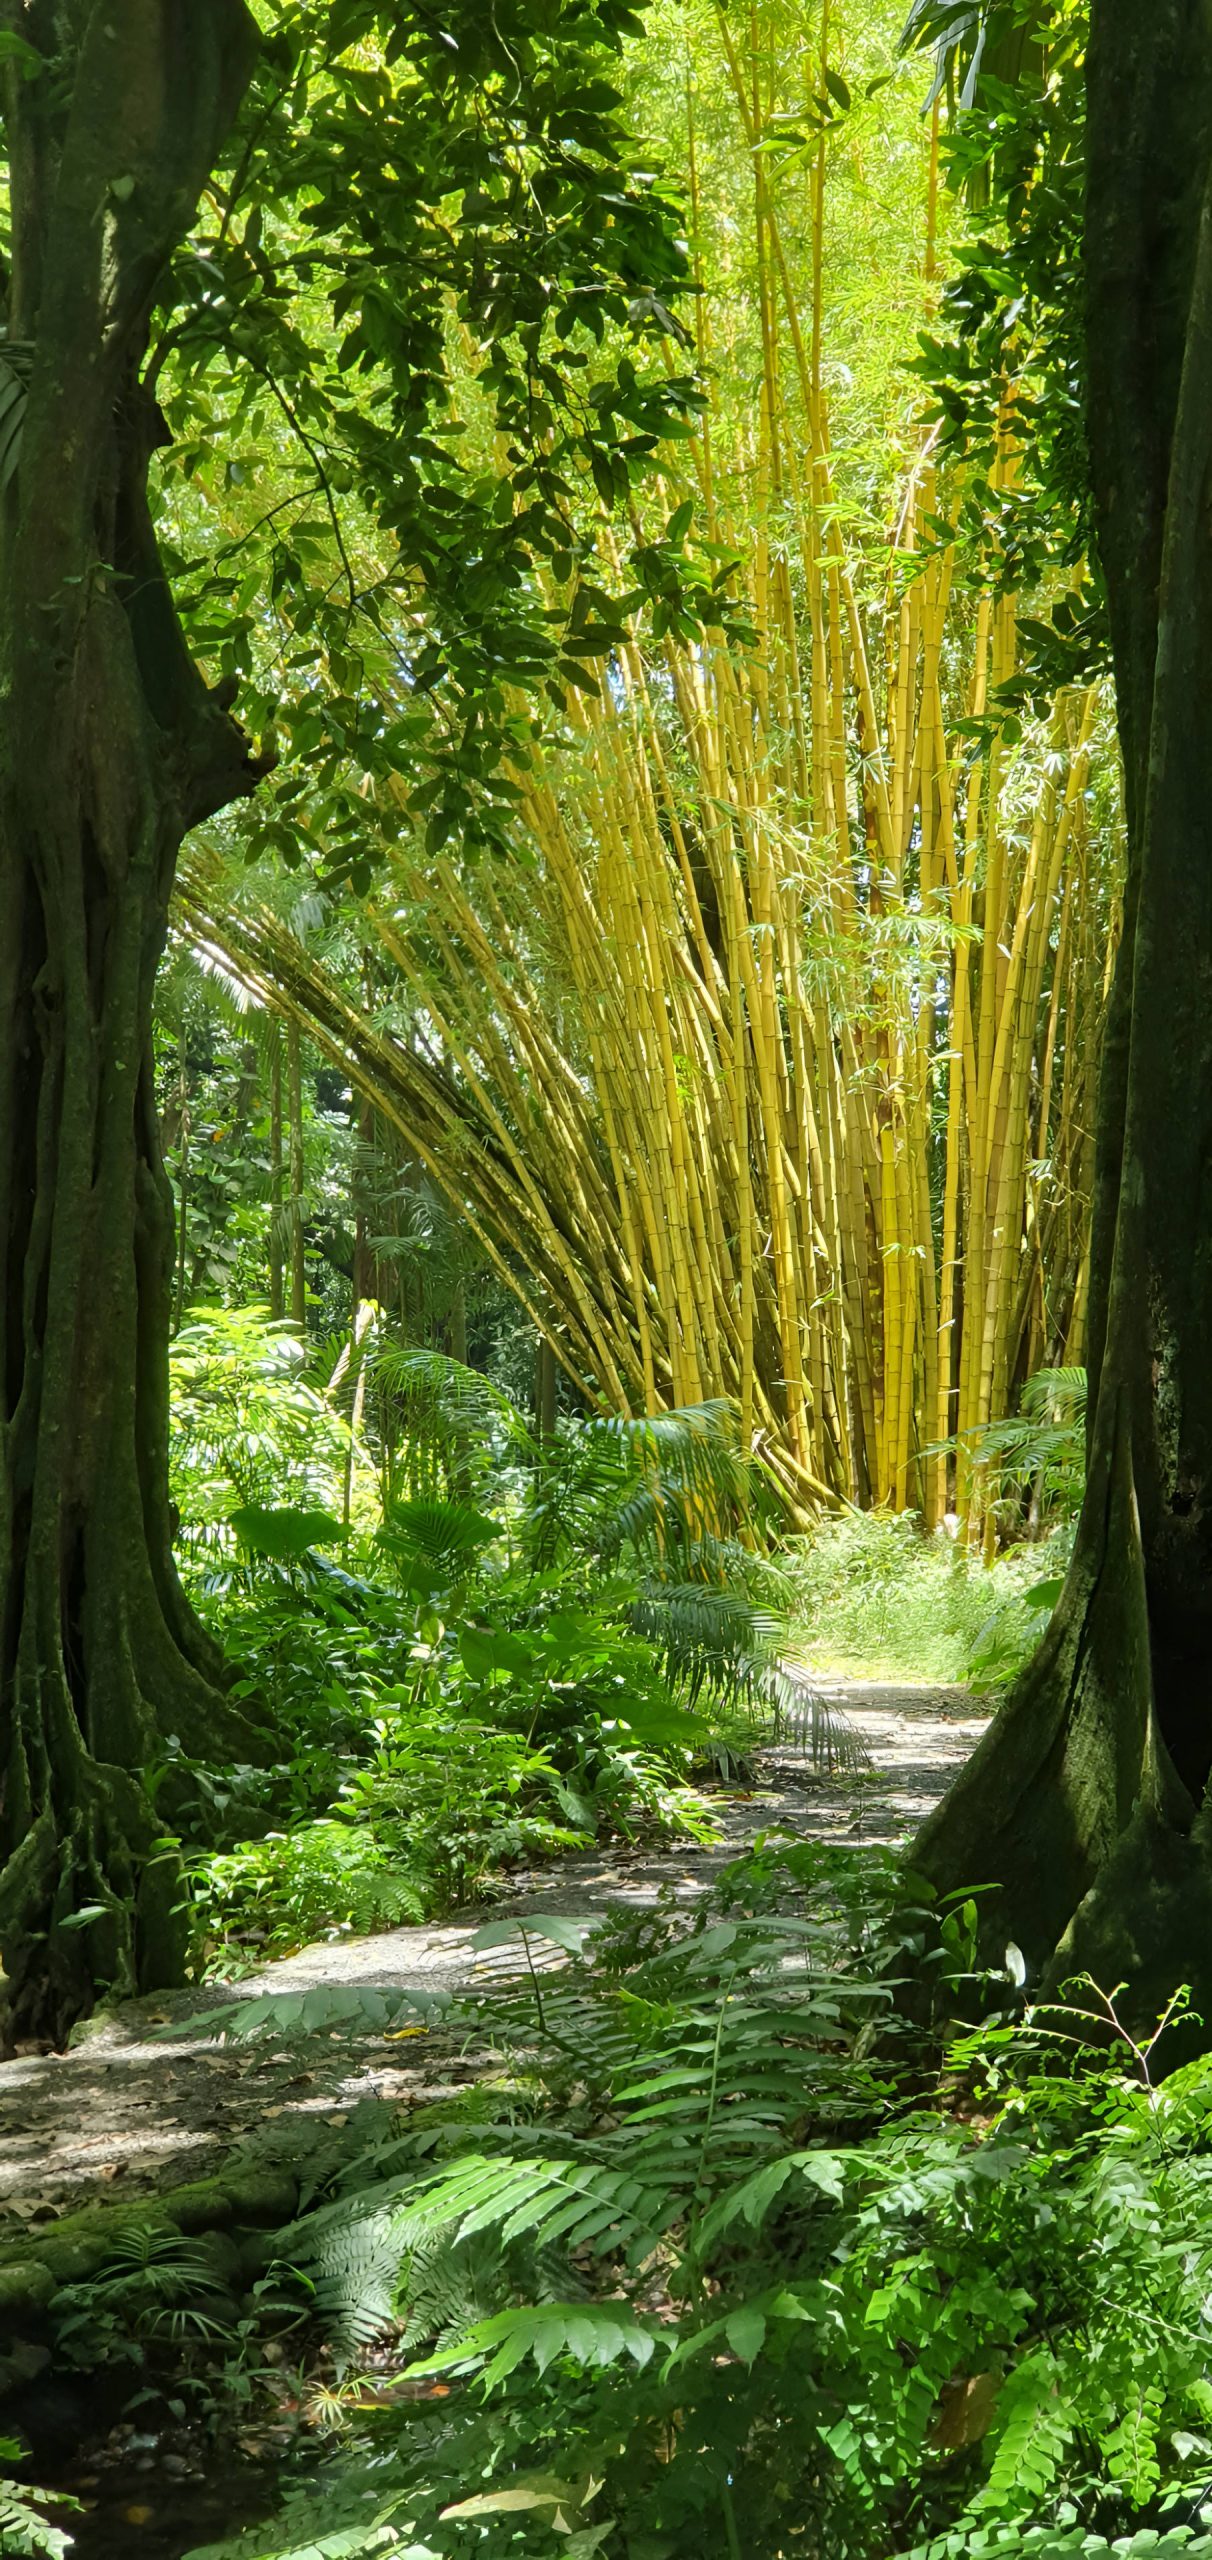 Local Chestnut forest, featuring Bamboo in the Botanical garden of Harrison Smith